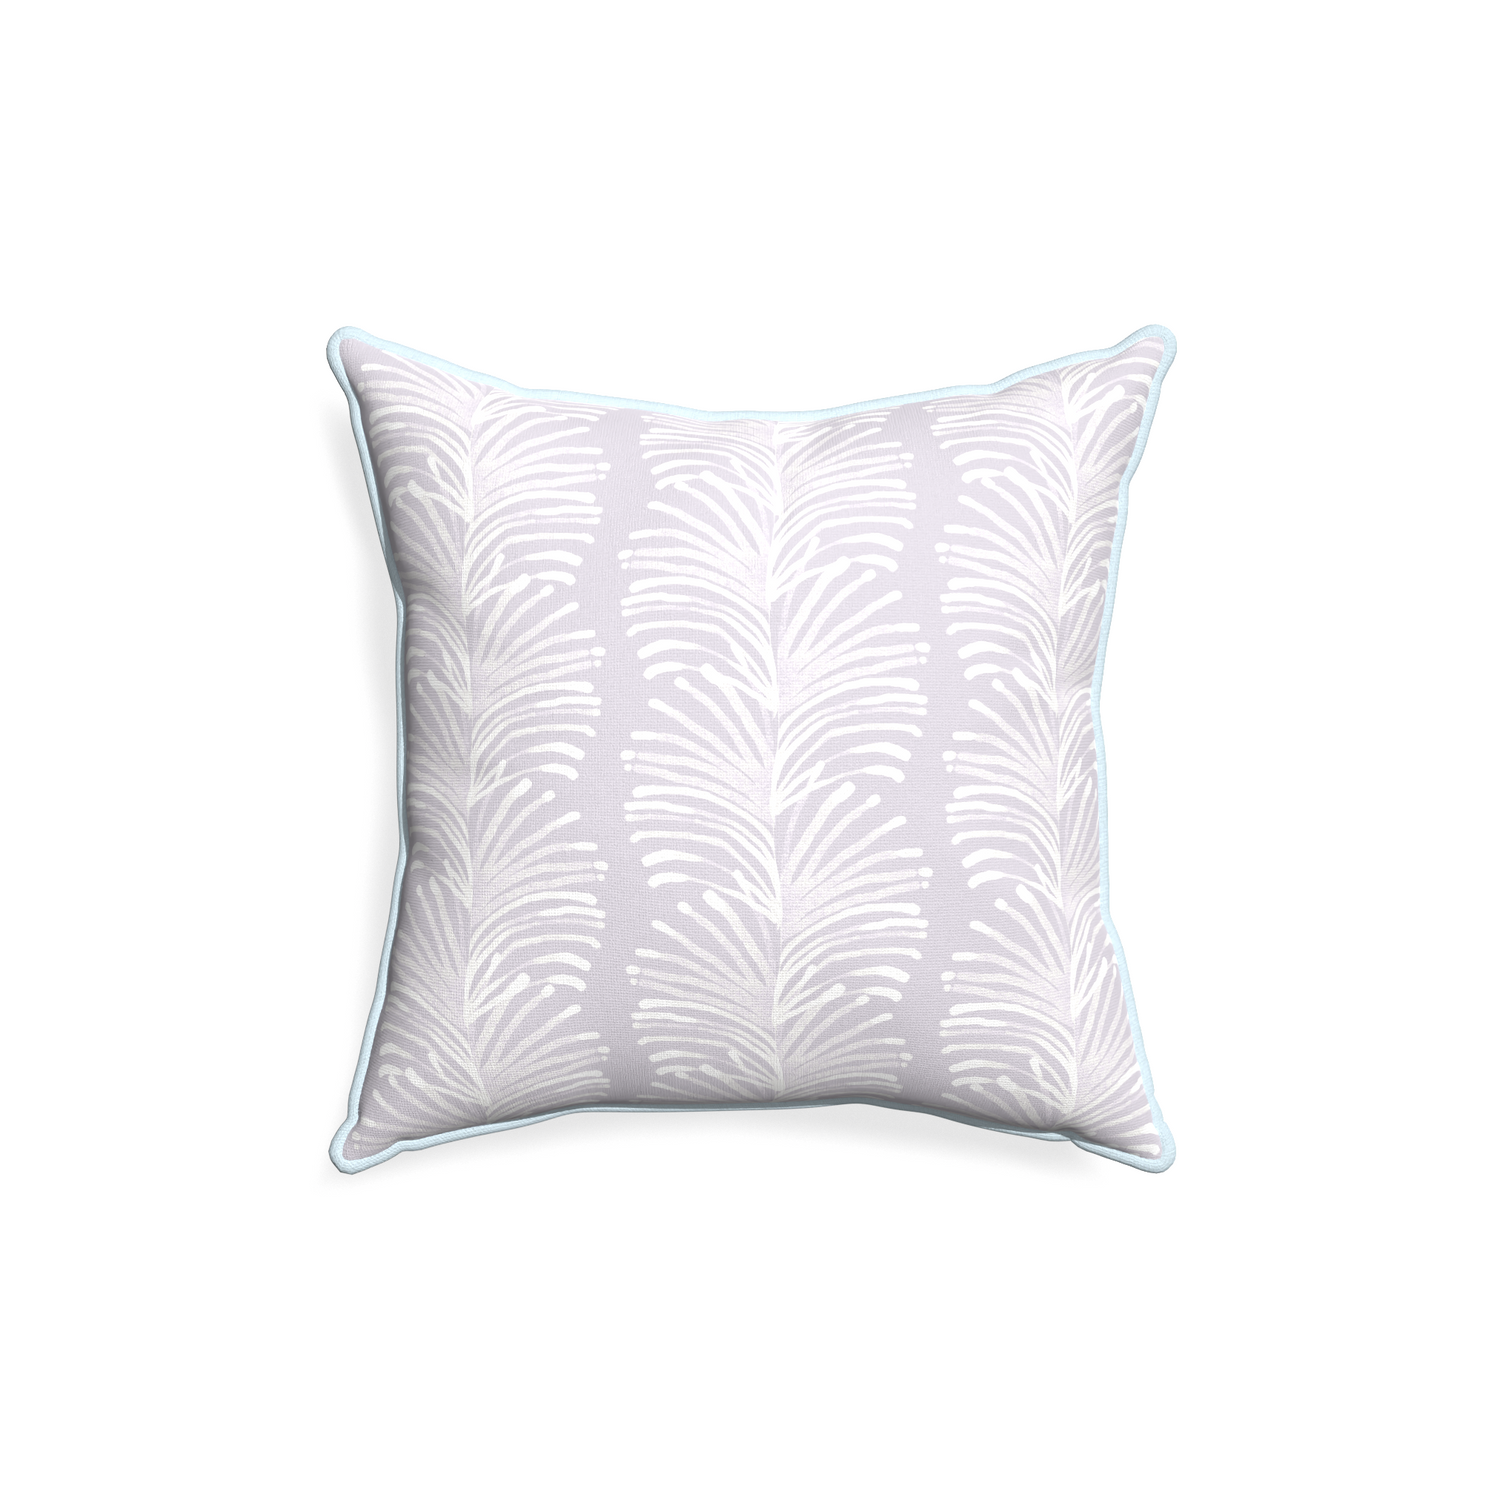 18-square emma lavender custom lavender botanical stripepillow with powder piping on white background